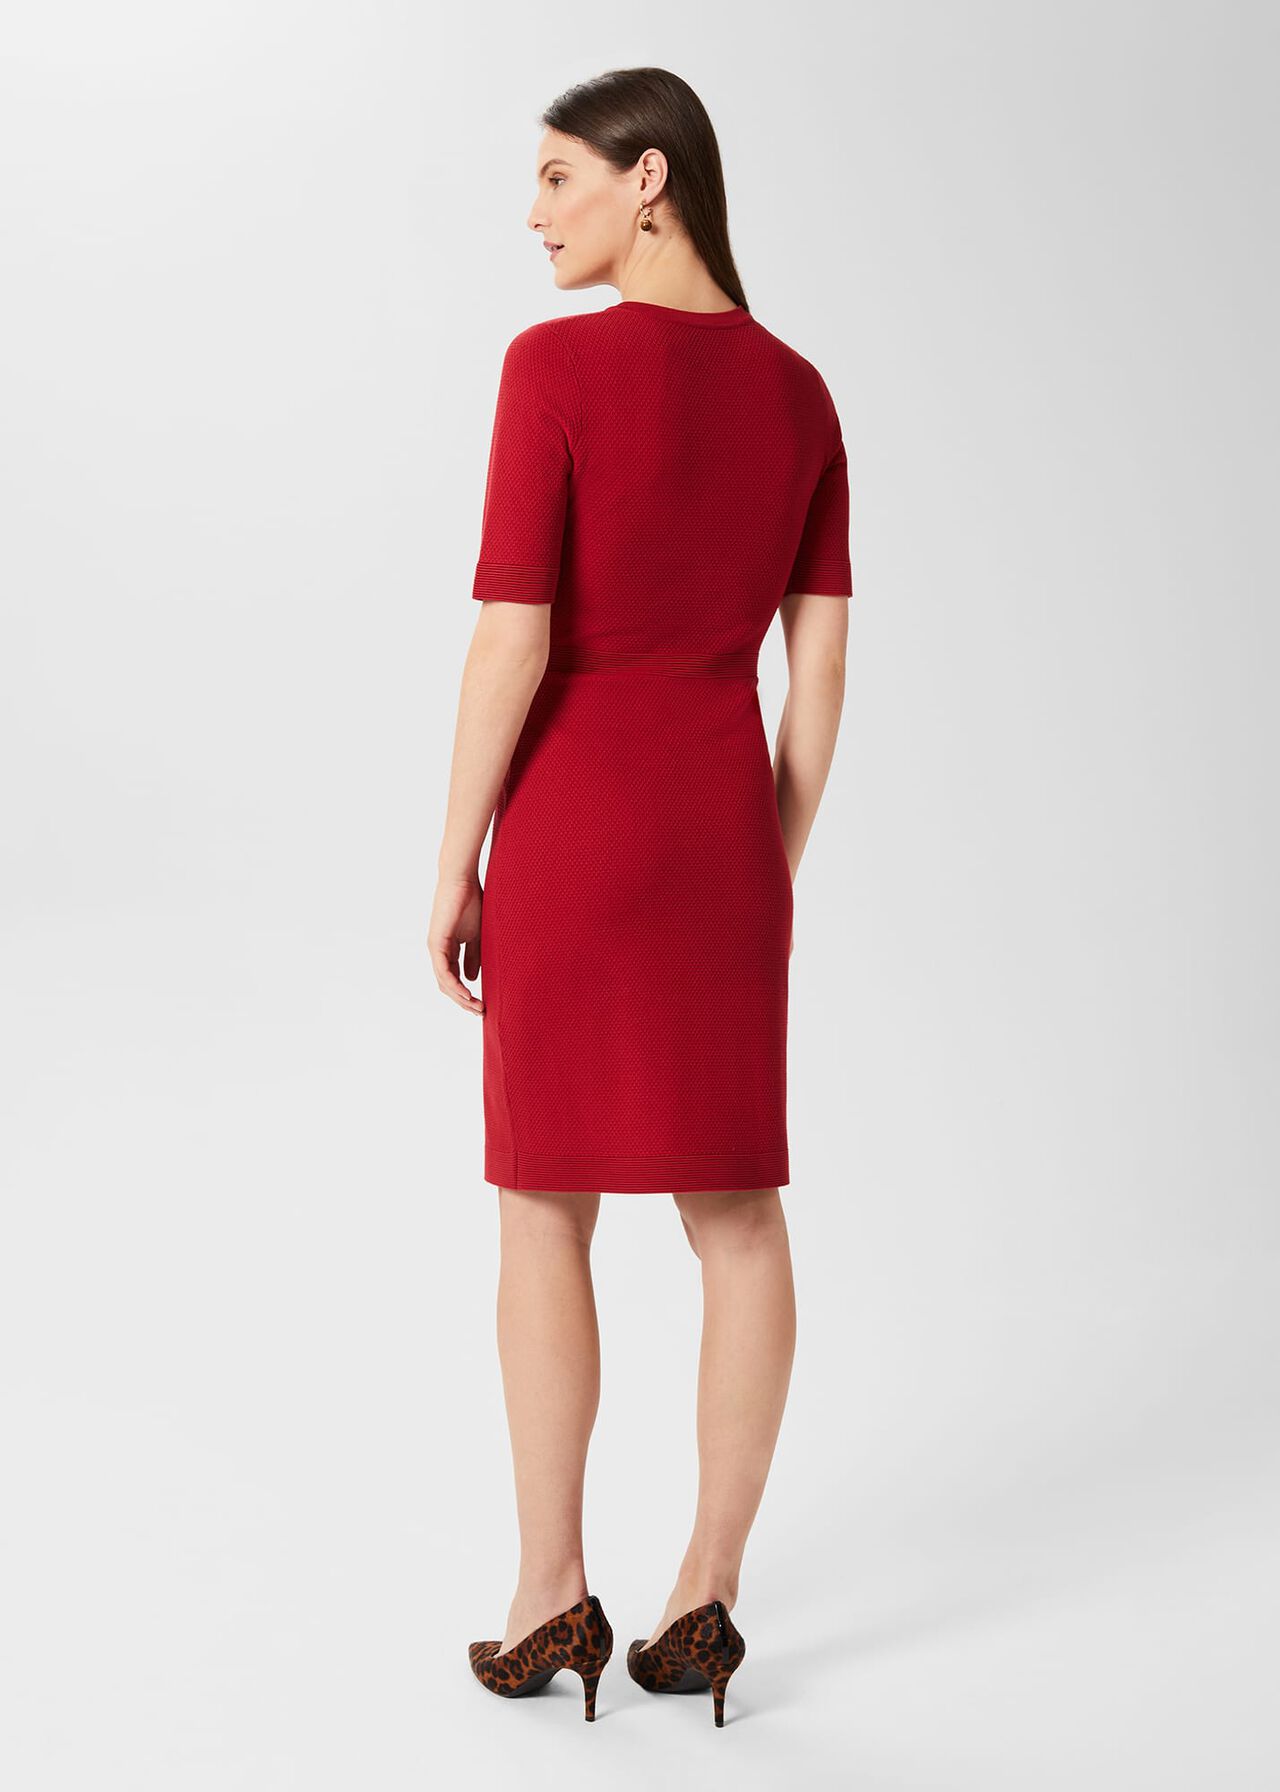 Noa Knitted Dress, Deep Red, hi-res